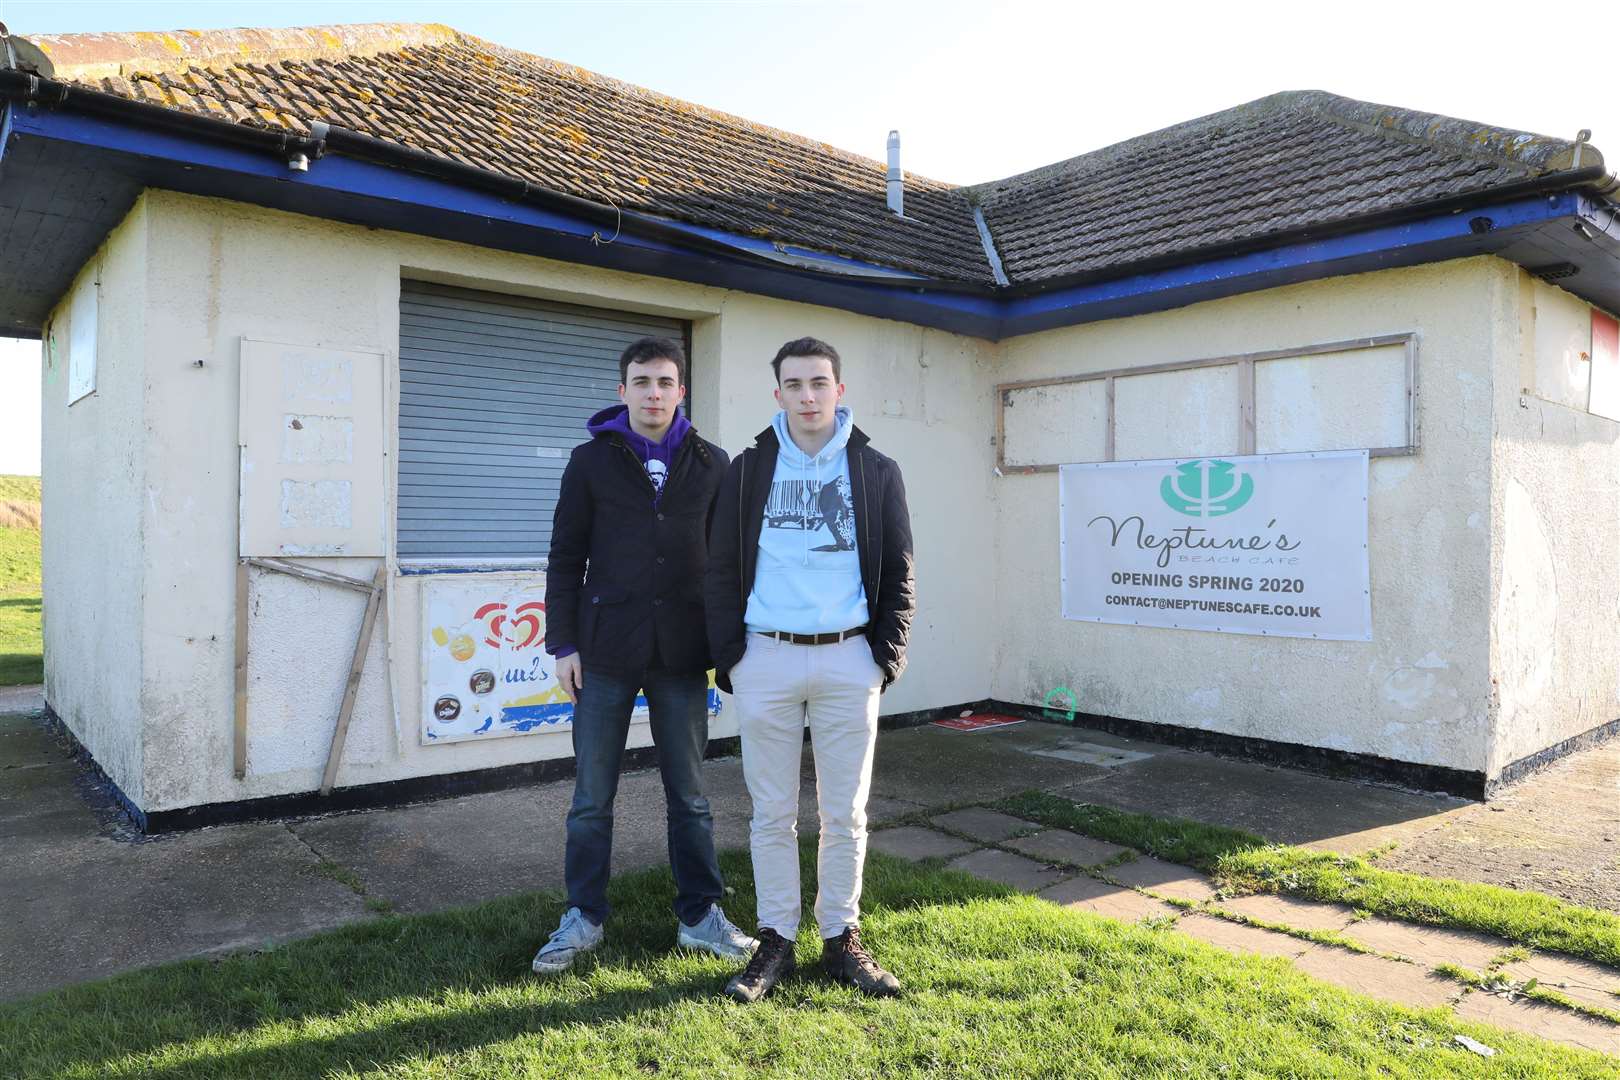 New owners Henry and Oliver Eakin outside Neptune's Beach Cafe, which will open in April this year